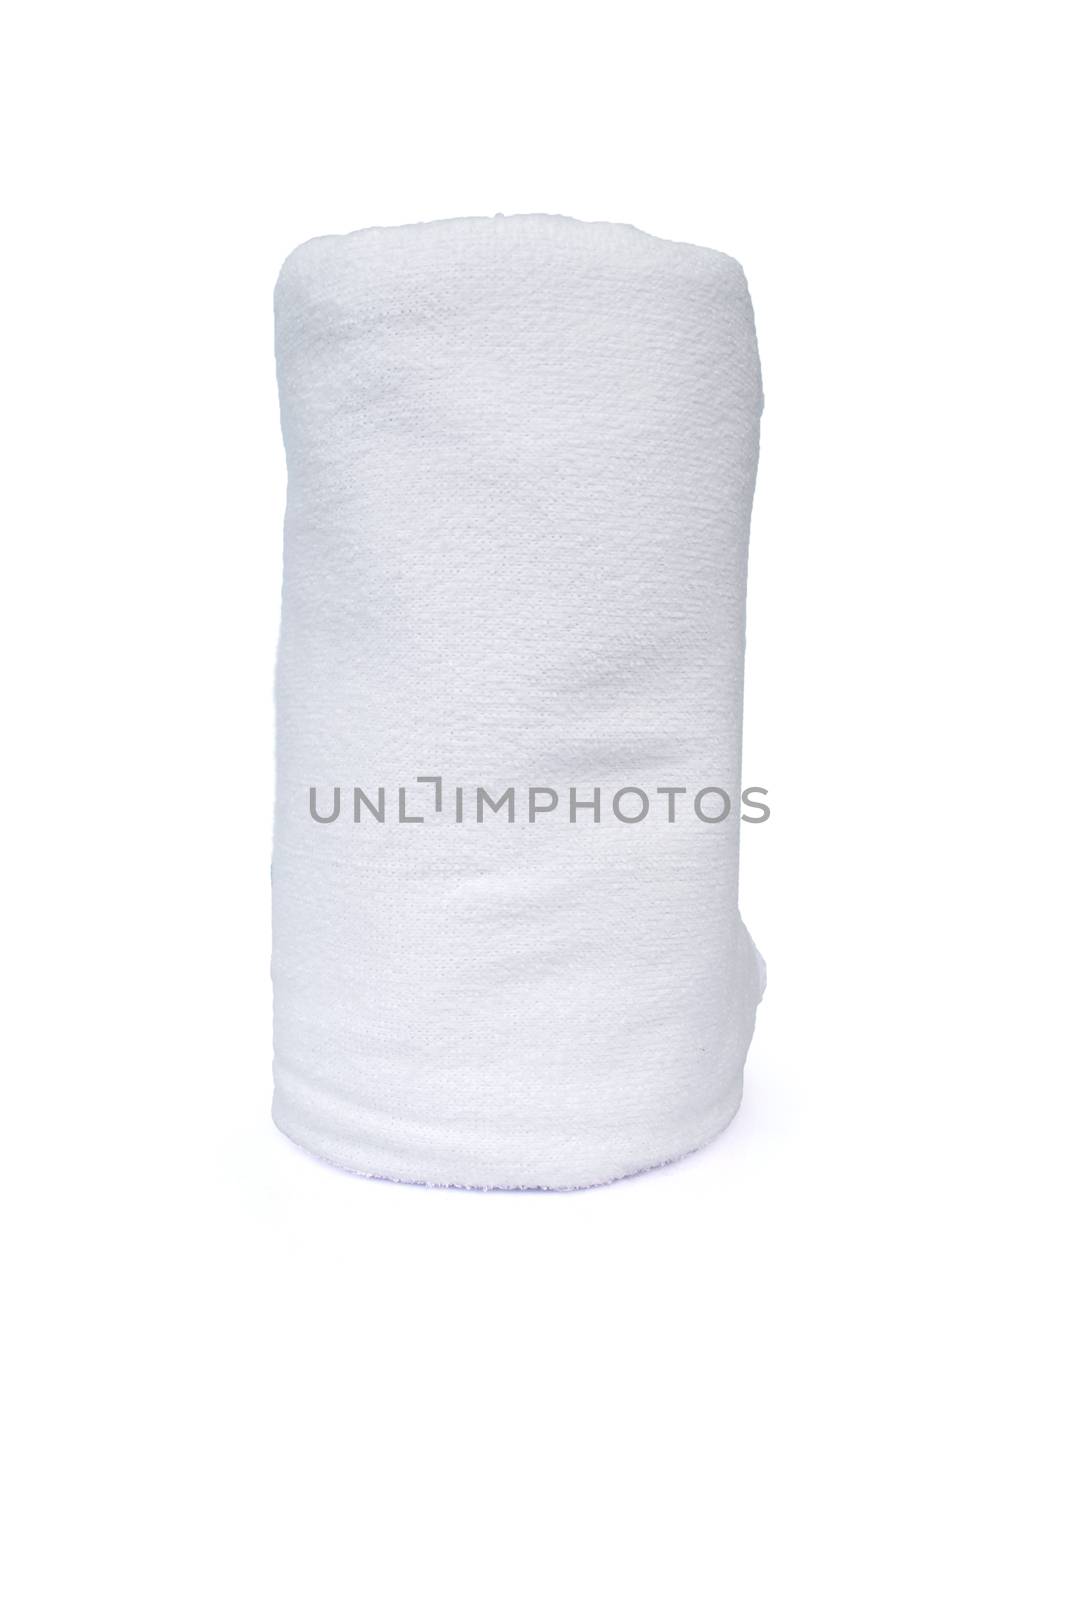 White towel on white background.(with Clipping Path).